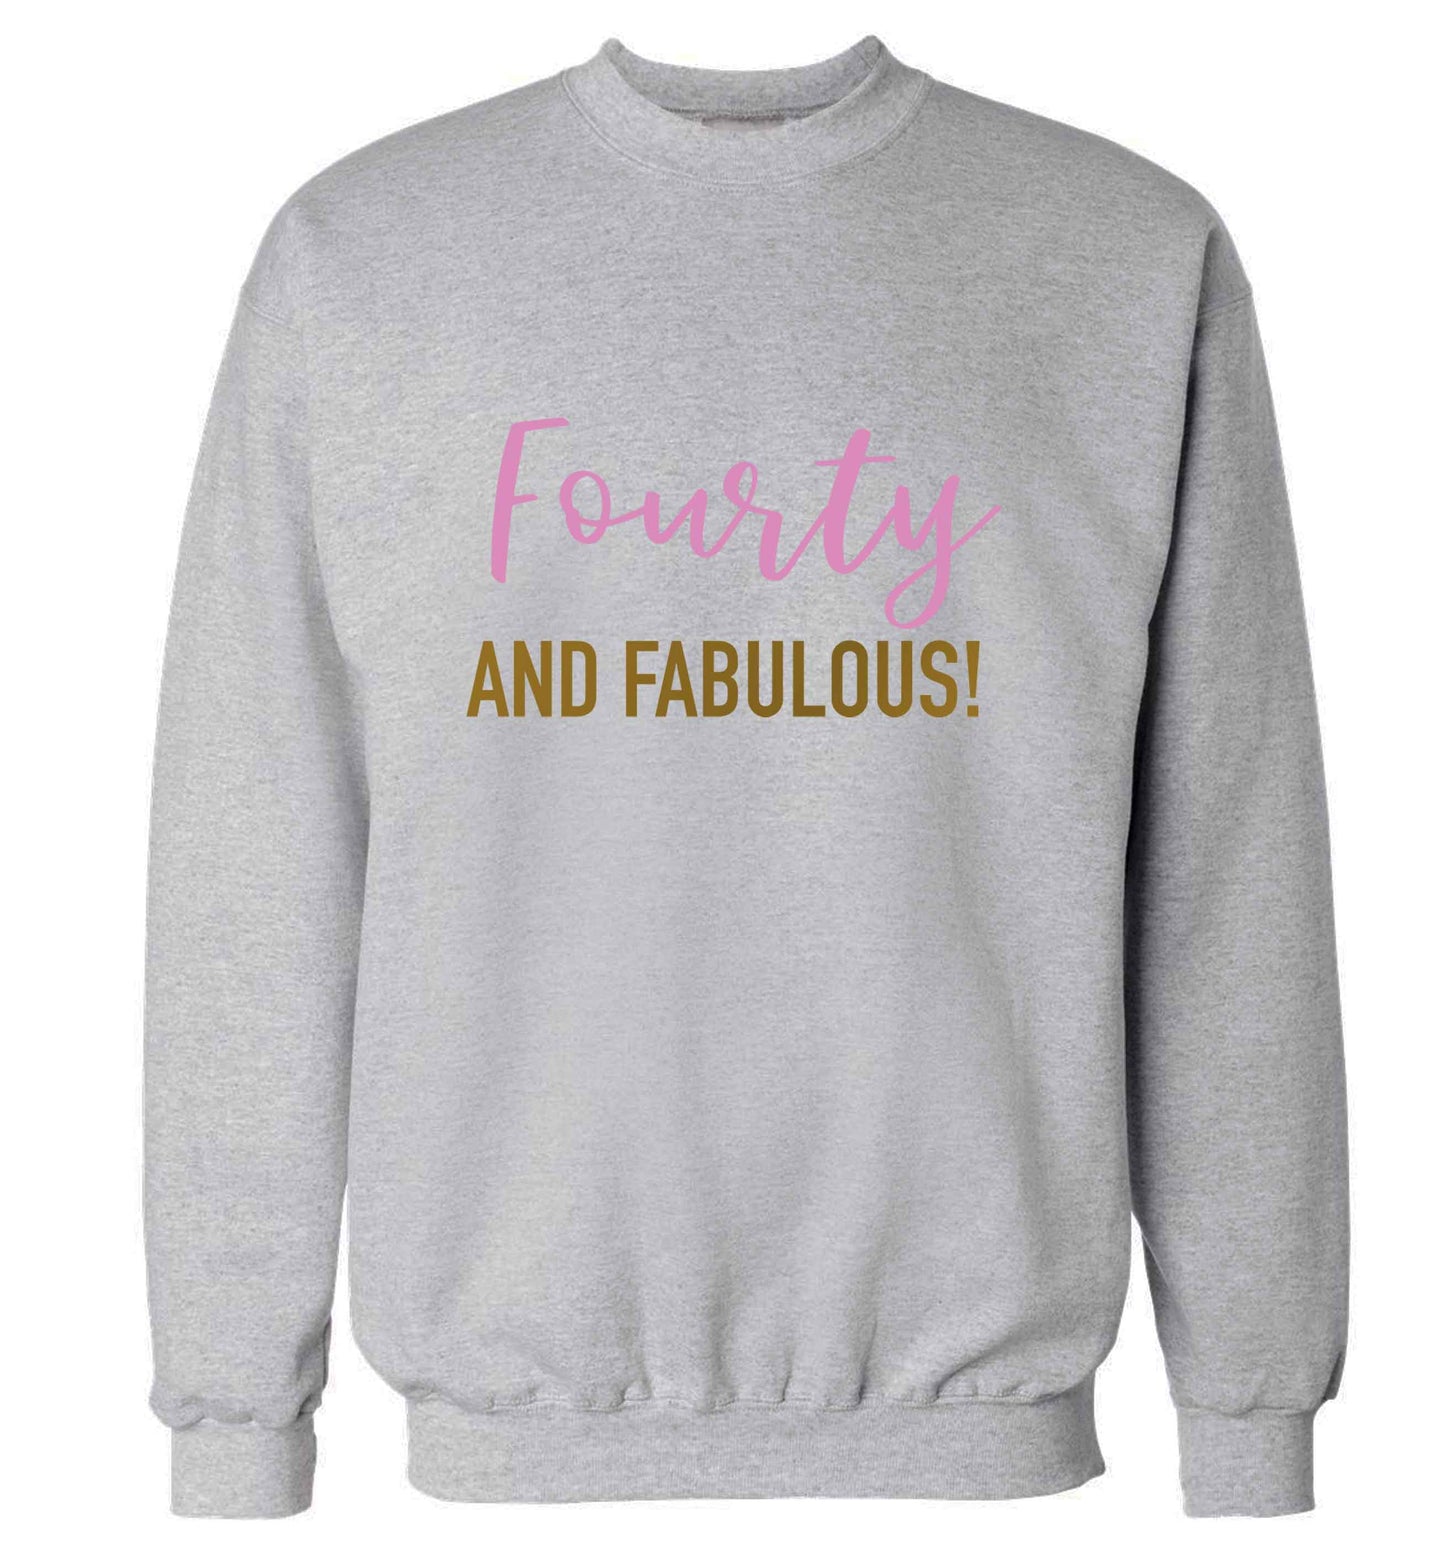 Fourty and fabulous adult's unisex grey sweater 2XL